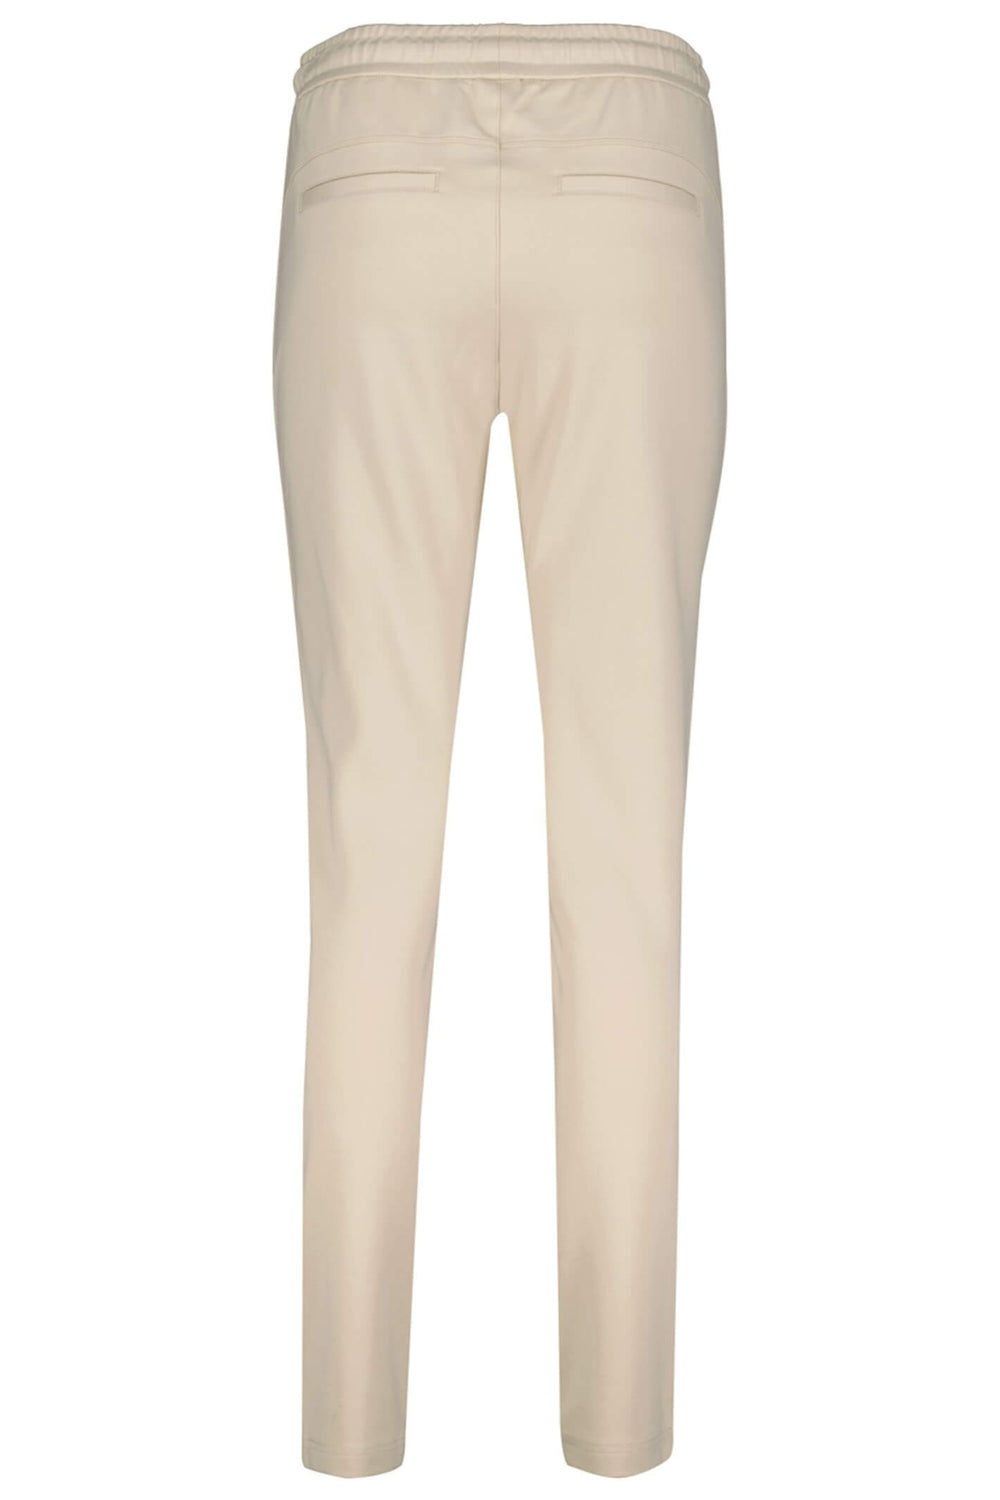 Red Button SRB4127 Tessy Stone Punta Pull-On Trousers - Olivia Grace Fashion